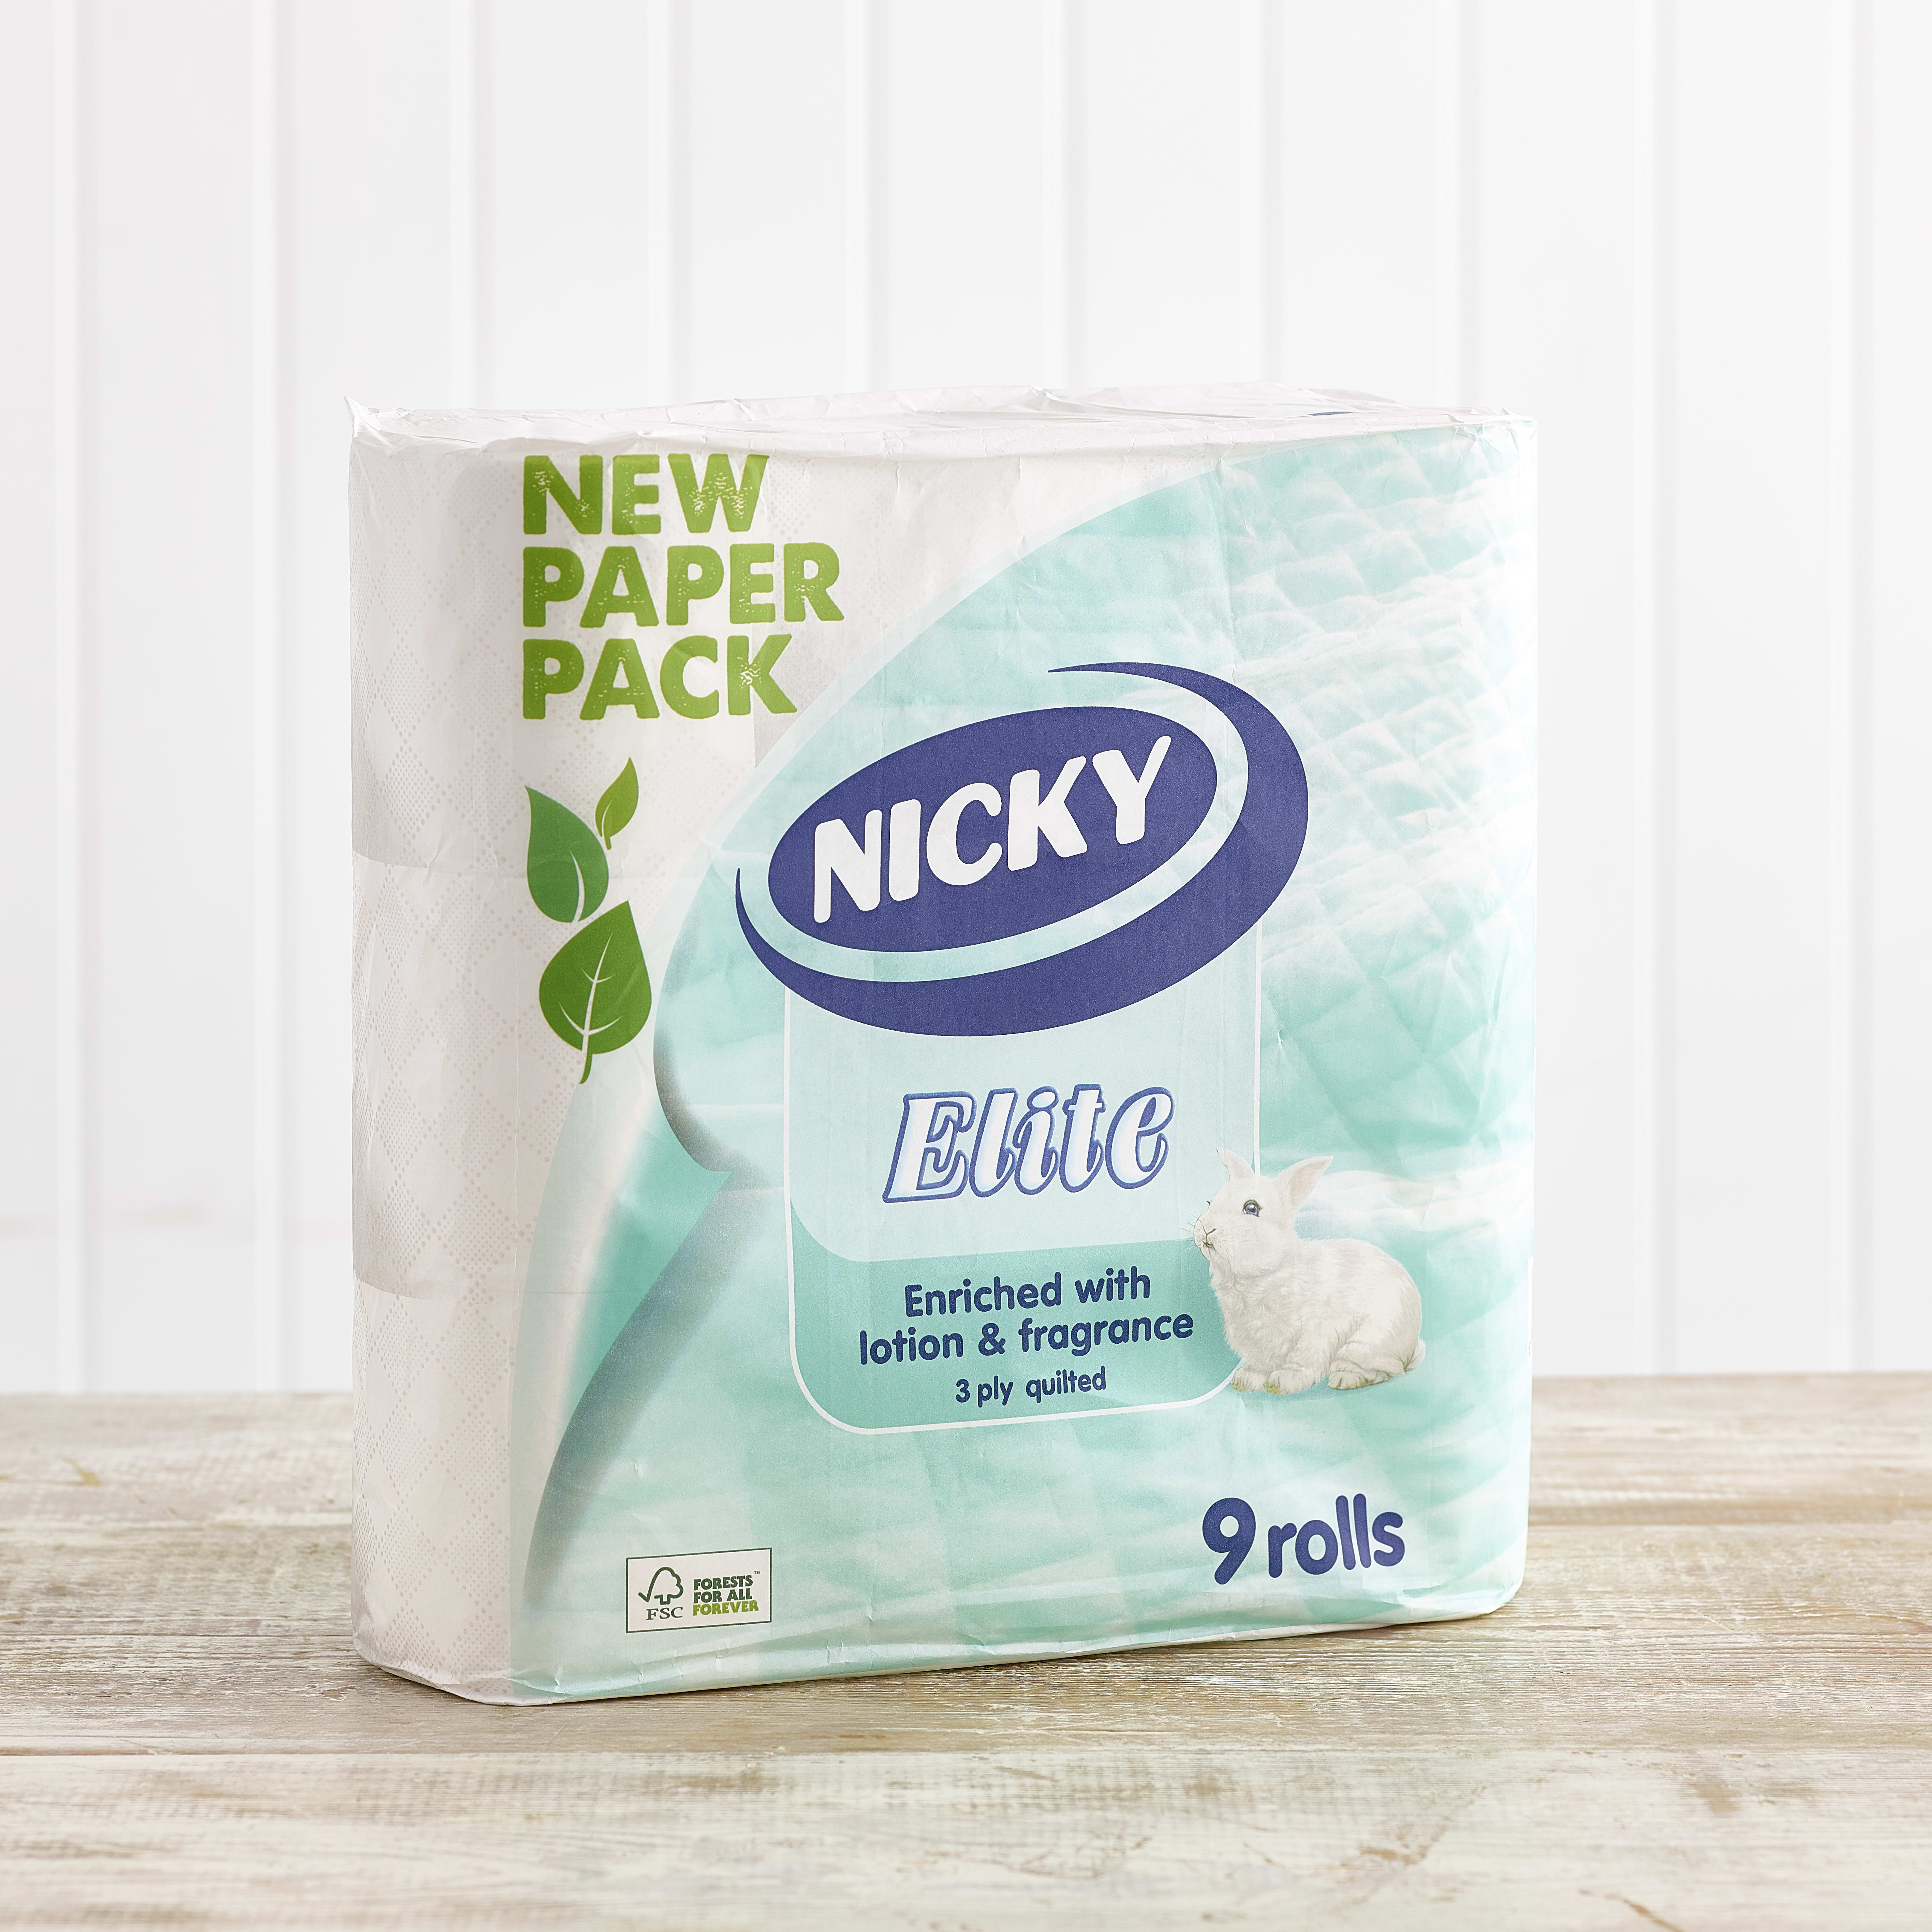 Nicky Elite 3ply Toilet Roll, 9 pack (100% Recyclable Paper Packaging)